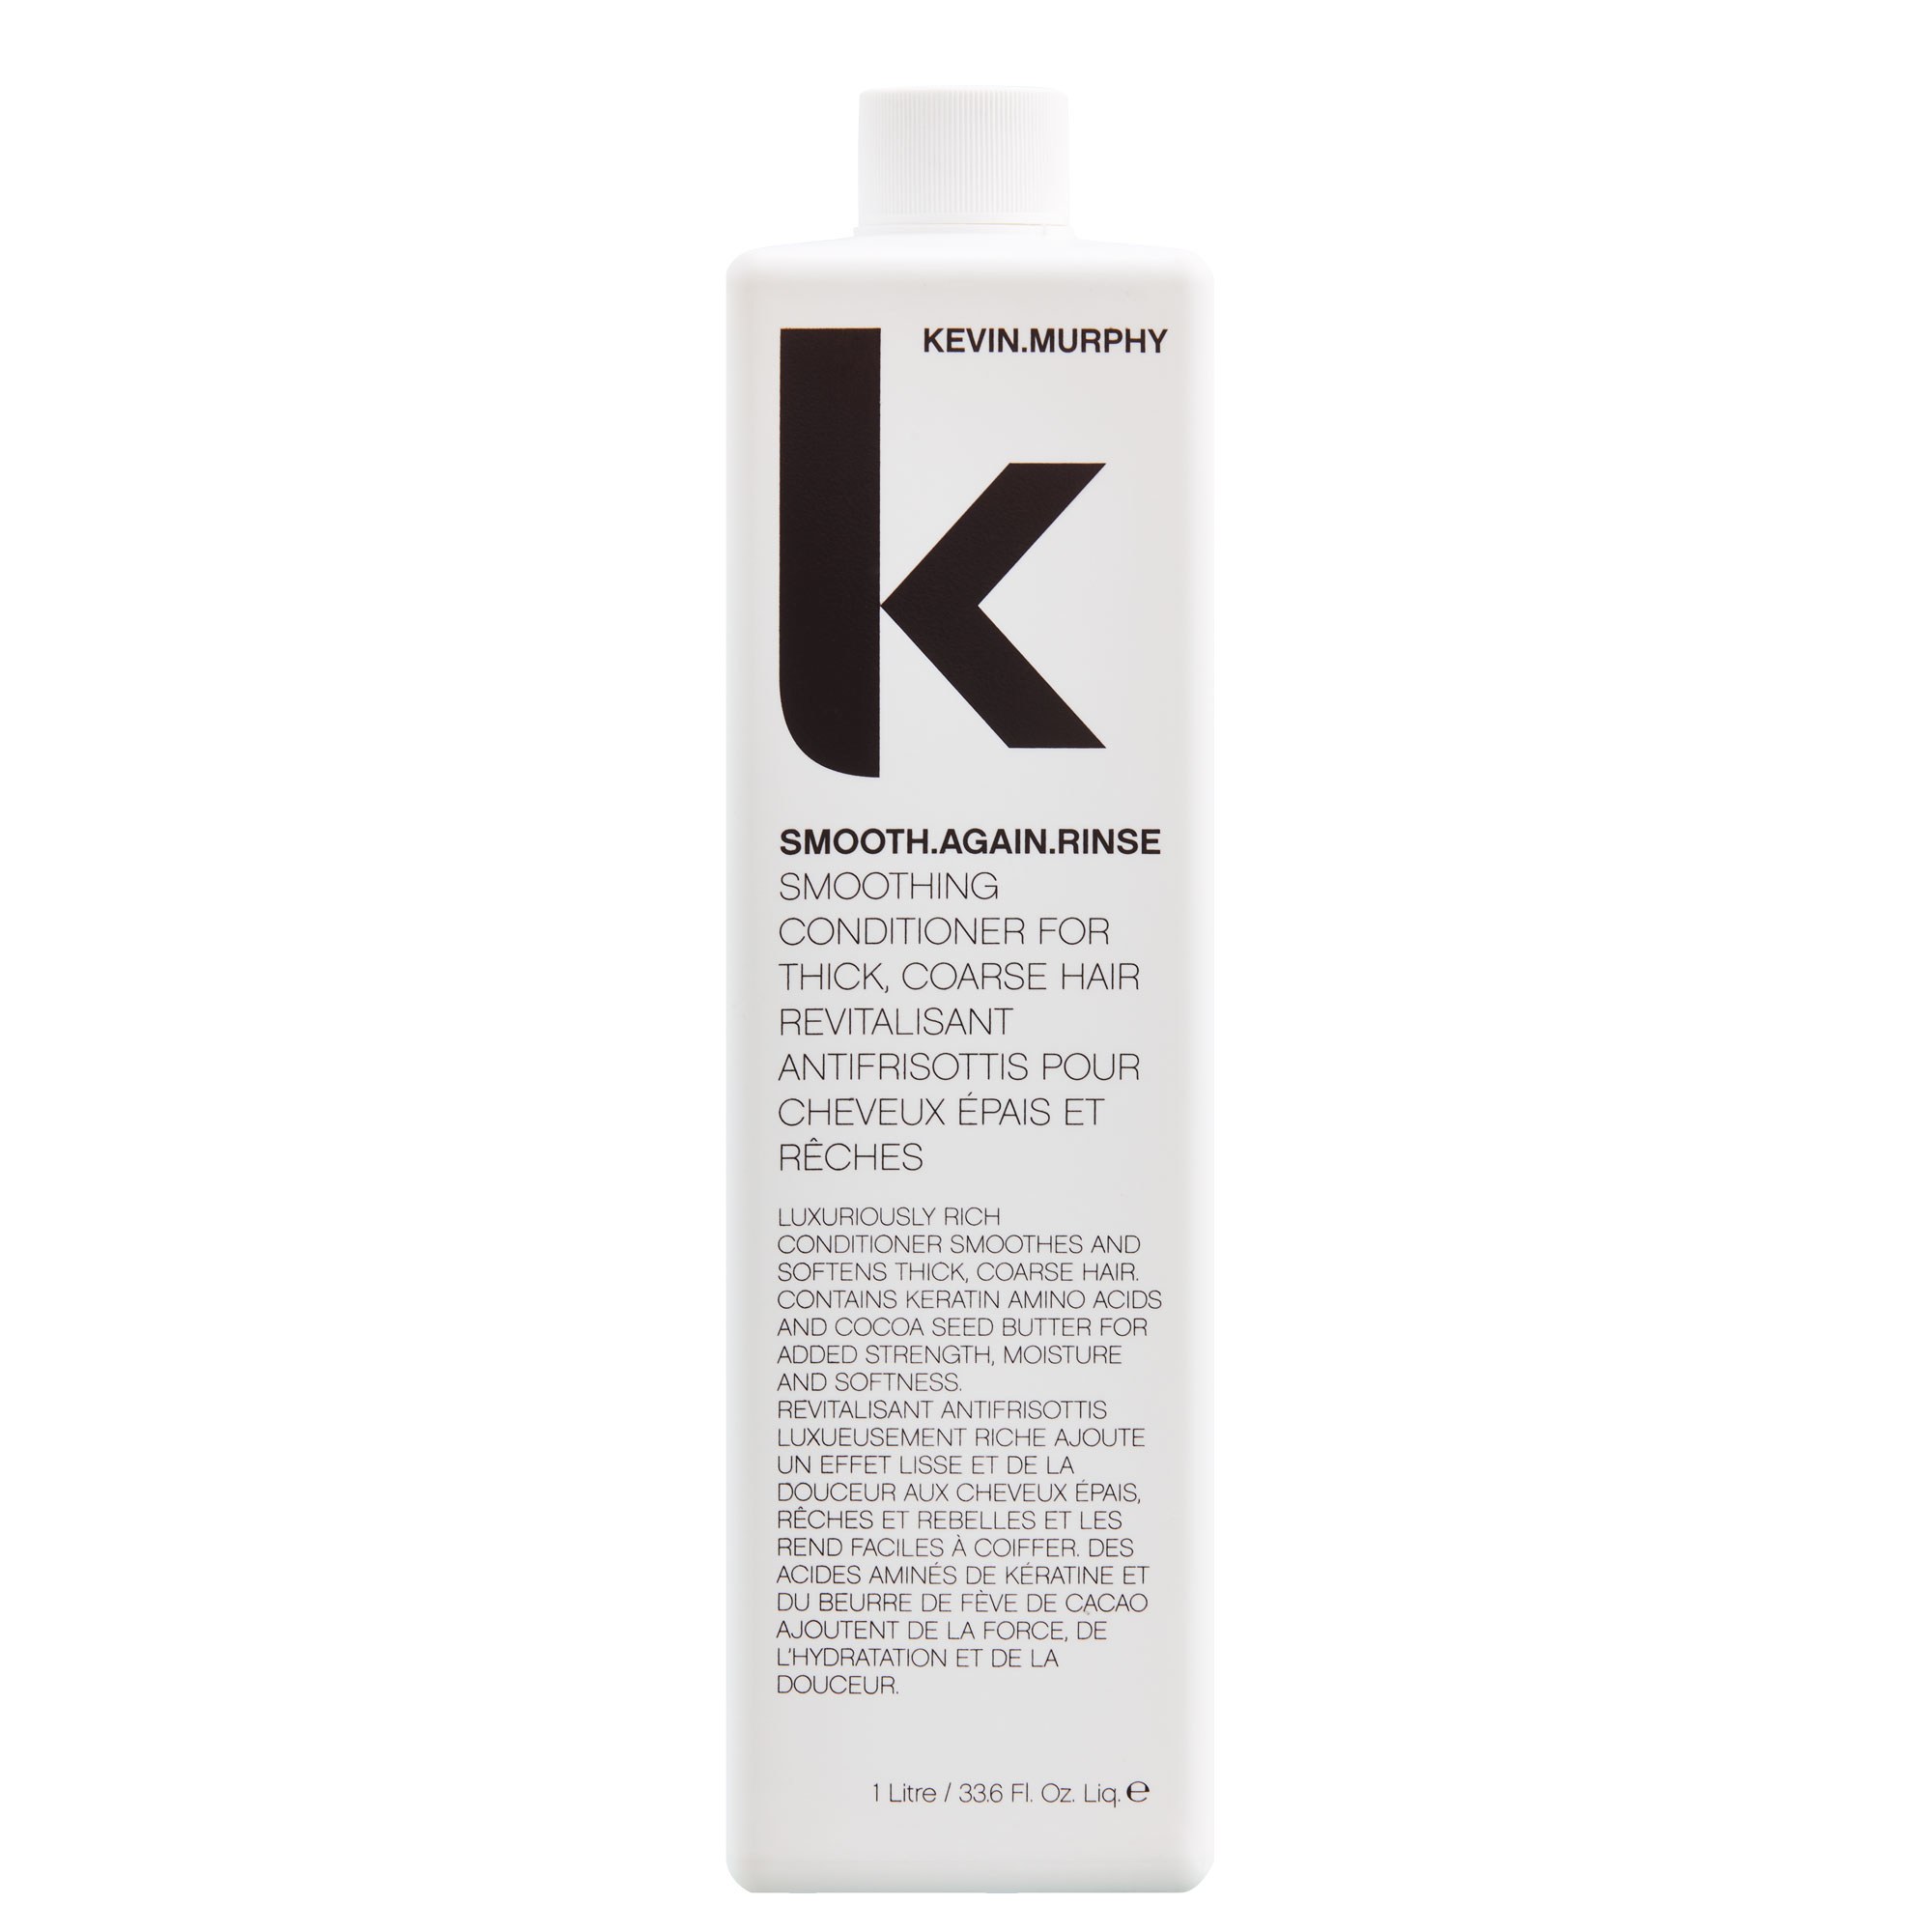 KEVIN.MURPHY SMOOTH.AGAIN Rinse 1liter